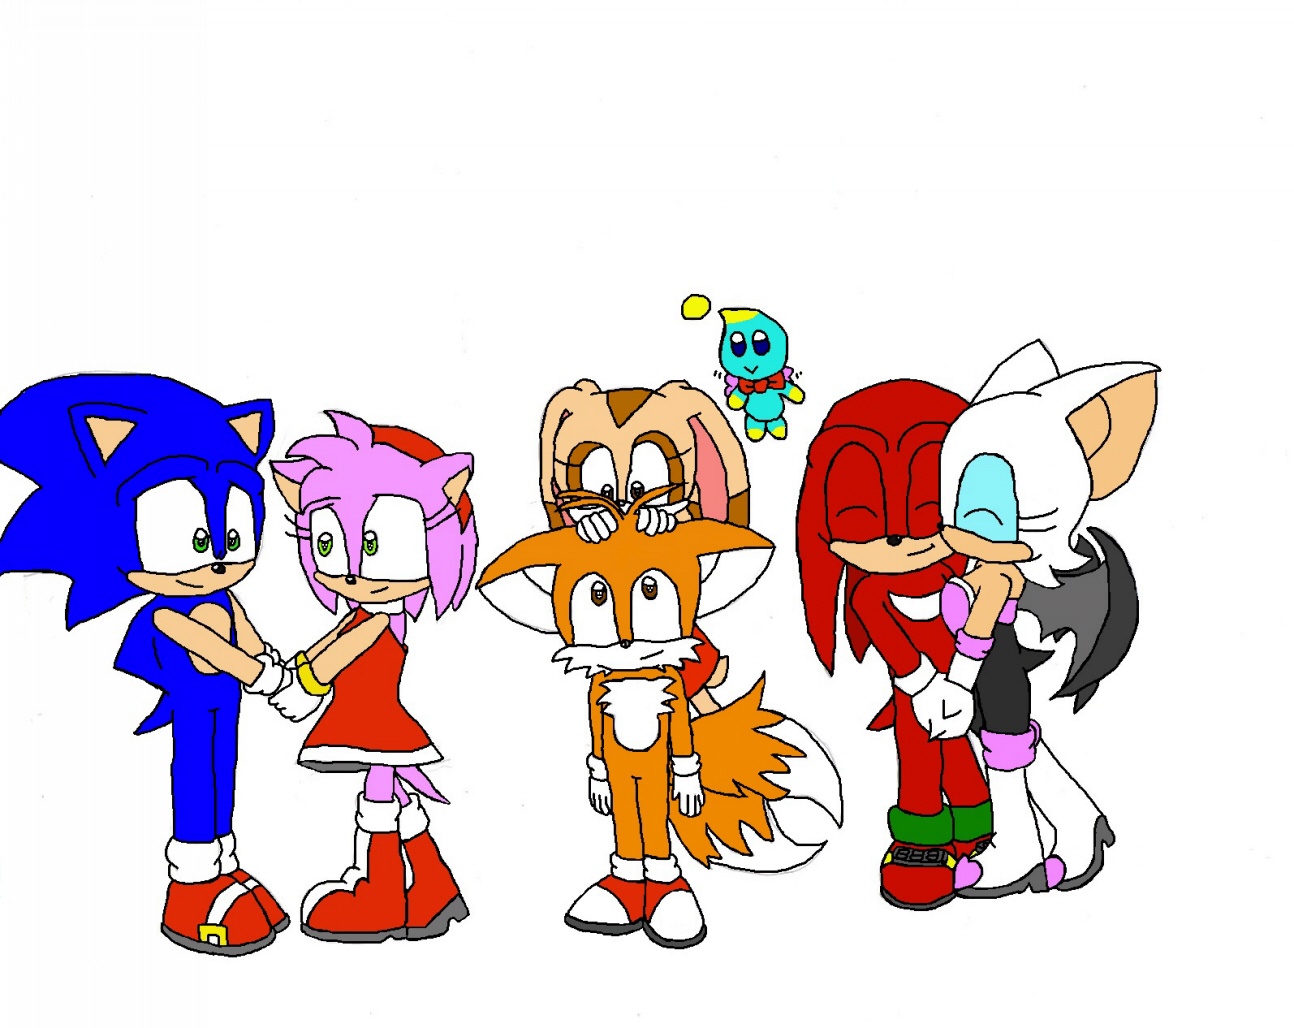 Couples Picture (Knouge, Sonamy, Tailscream) by knux_and_rouge_fan